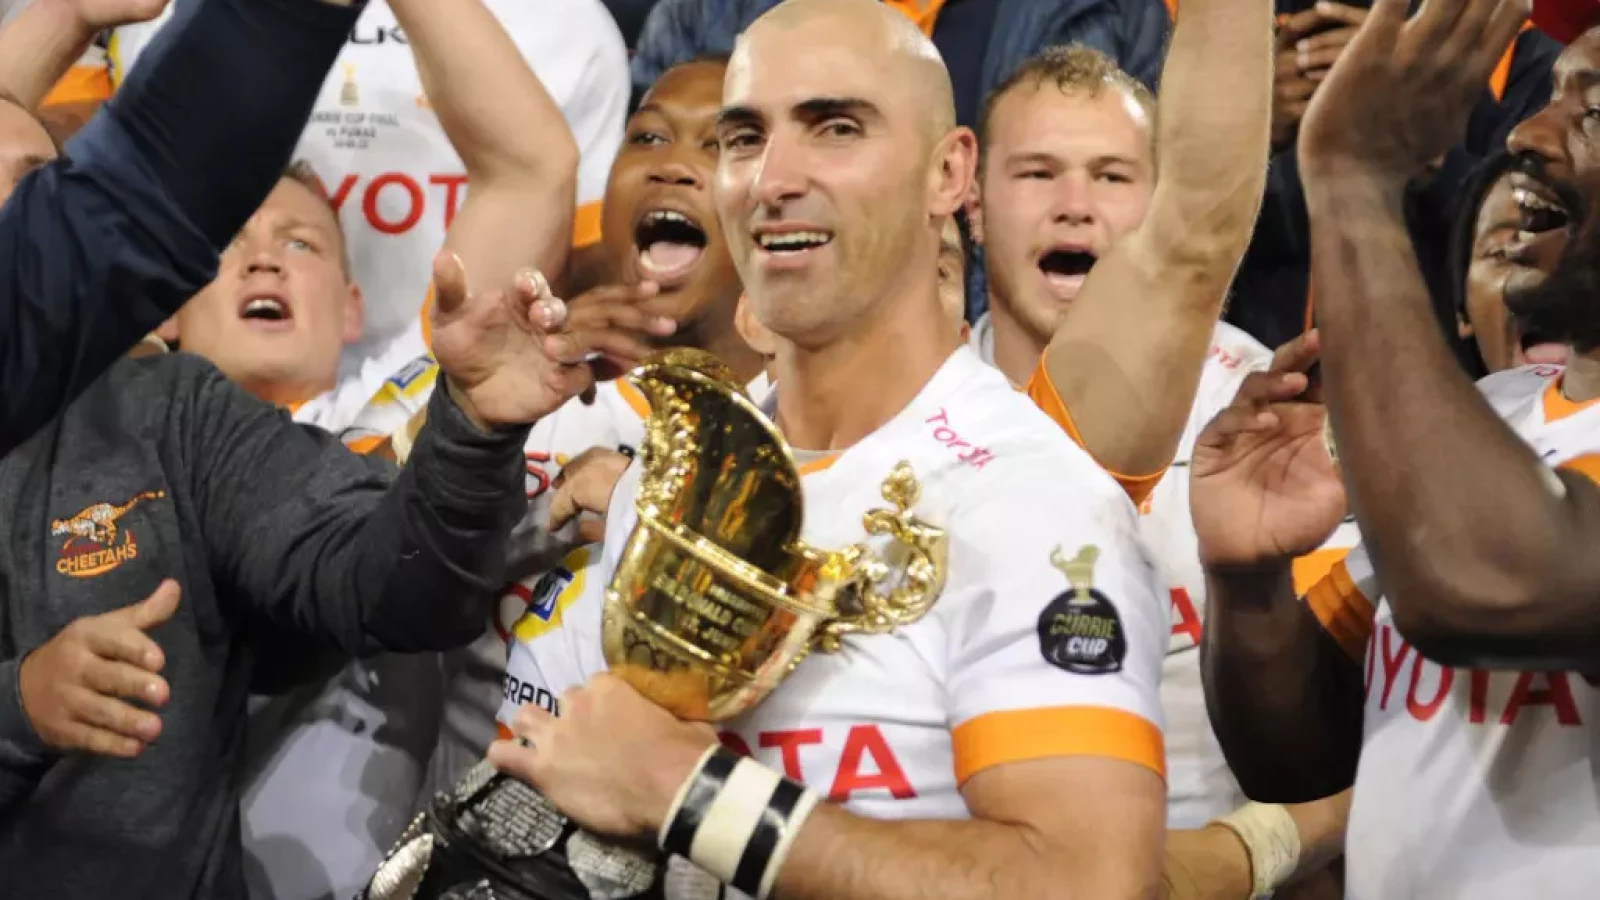 Currie Cup champion Cheetahs confirmed for another season in Challenge Cup rugby